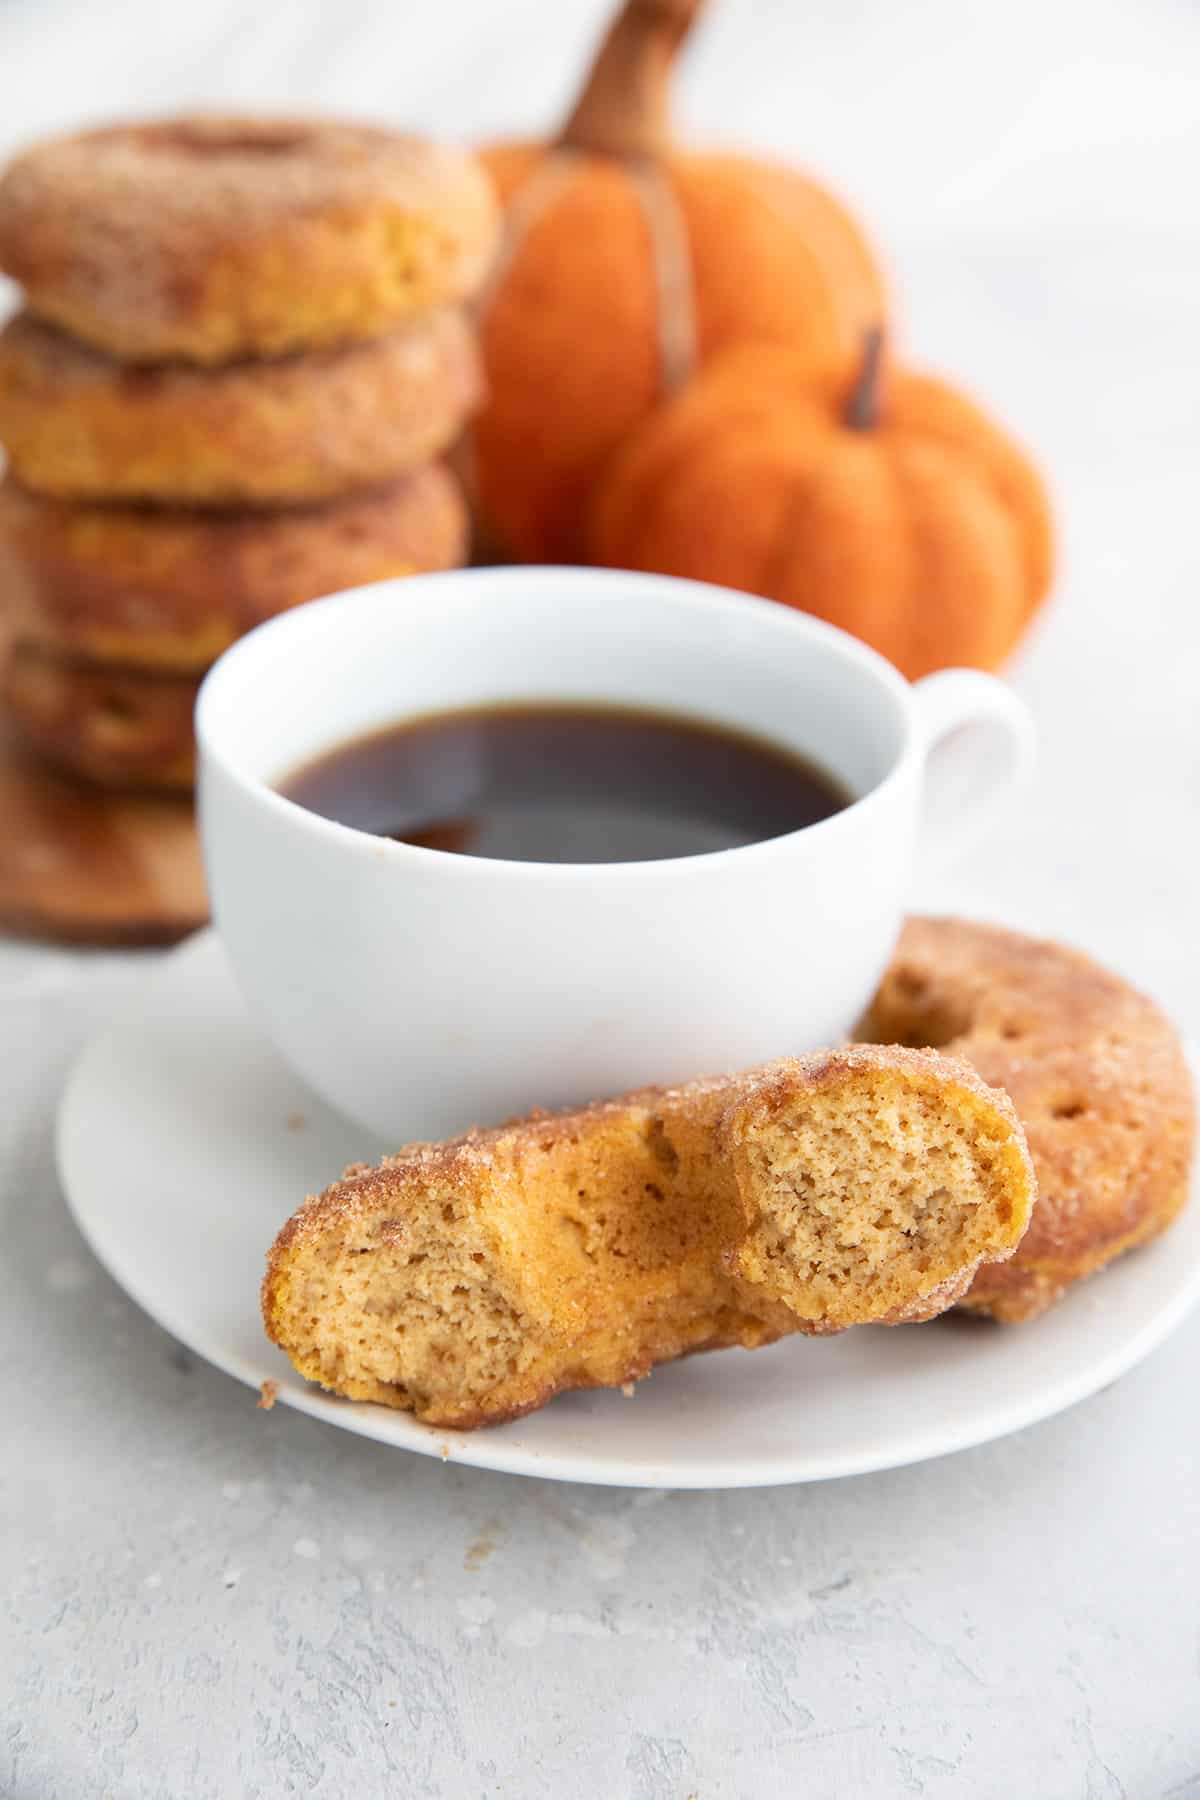 A Keto Pumpkin Spice Donut broken open on a plate with a cup of coffee.